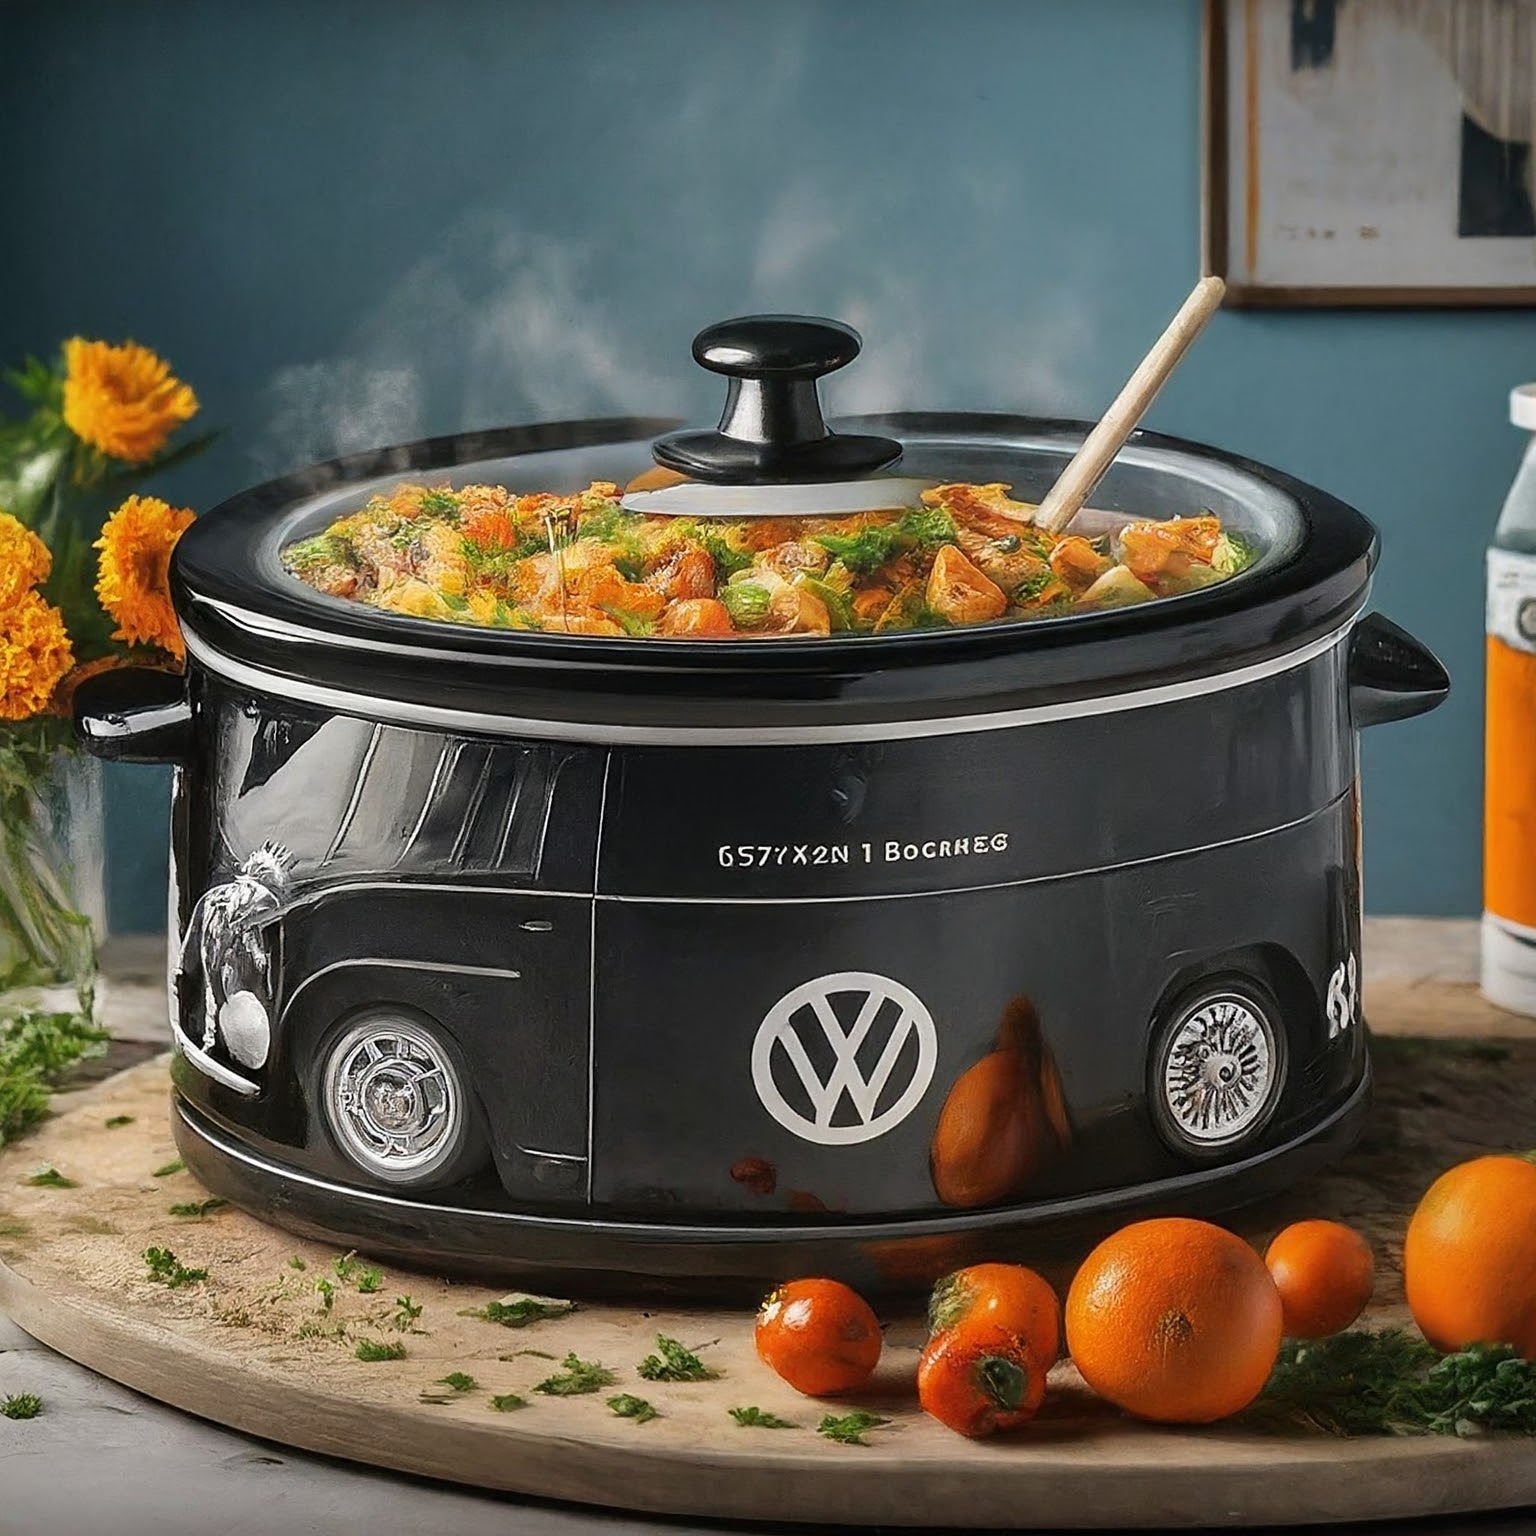 Volkswagen Bus Shaped Slow Cookers: Infusing Retro Vibes into Your Kitchen Adventure luxarts volkswagen bus slow cookers 17